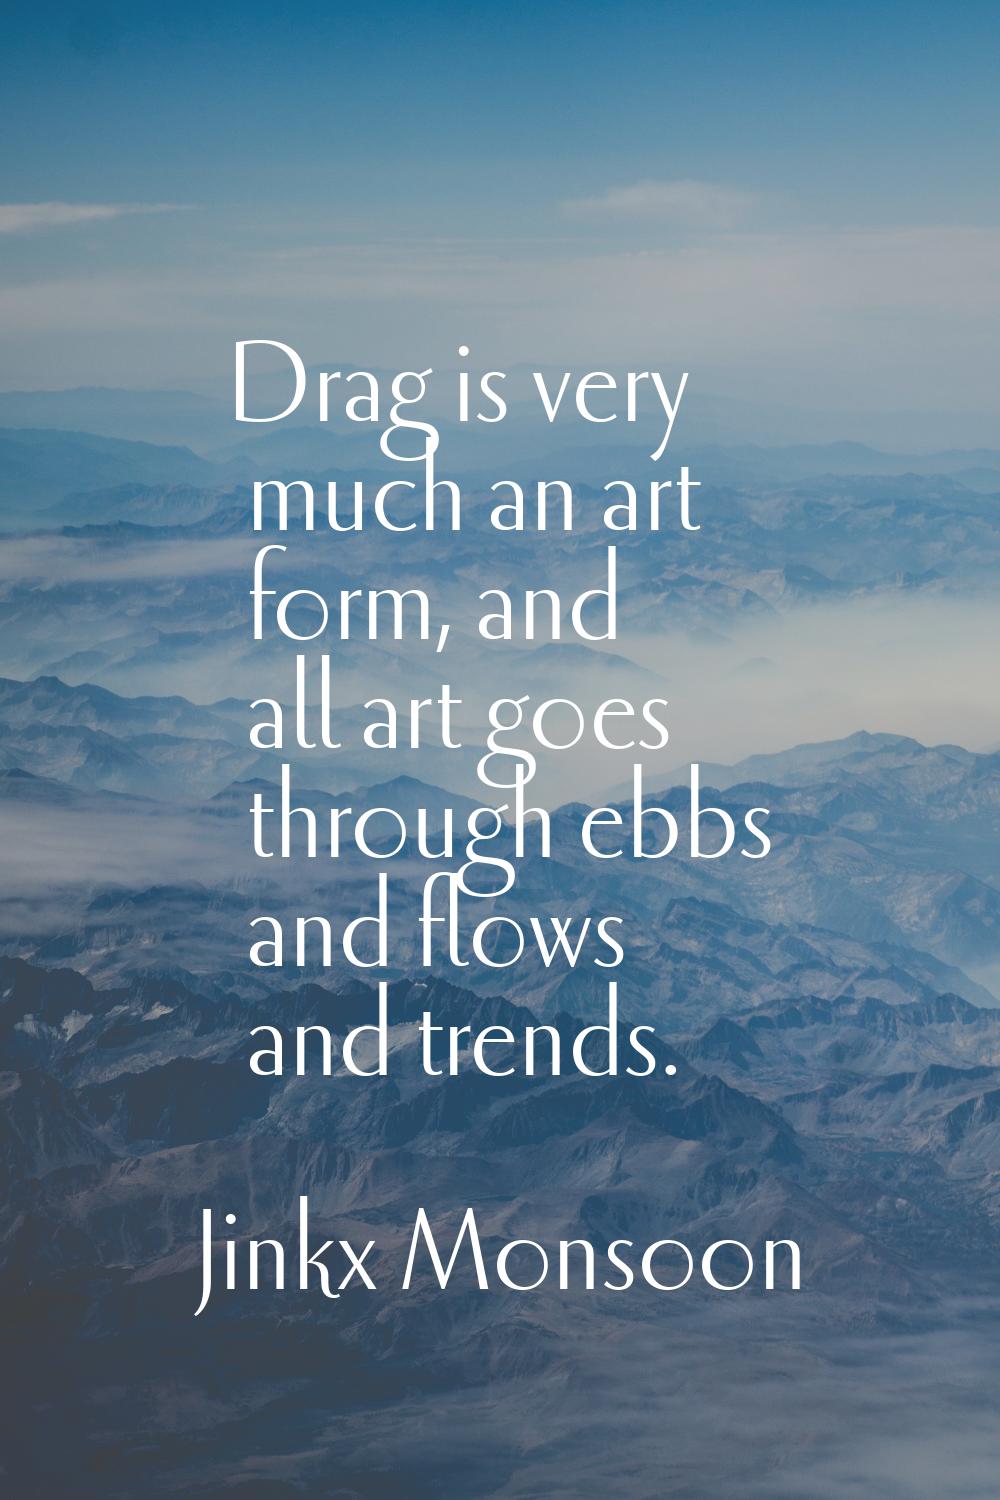 Drag is very much an art form, and all art goes through ebbs and flows and trends.